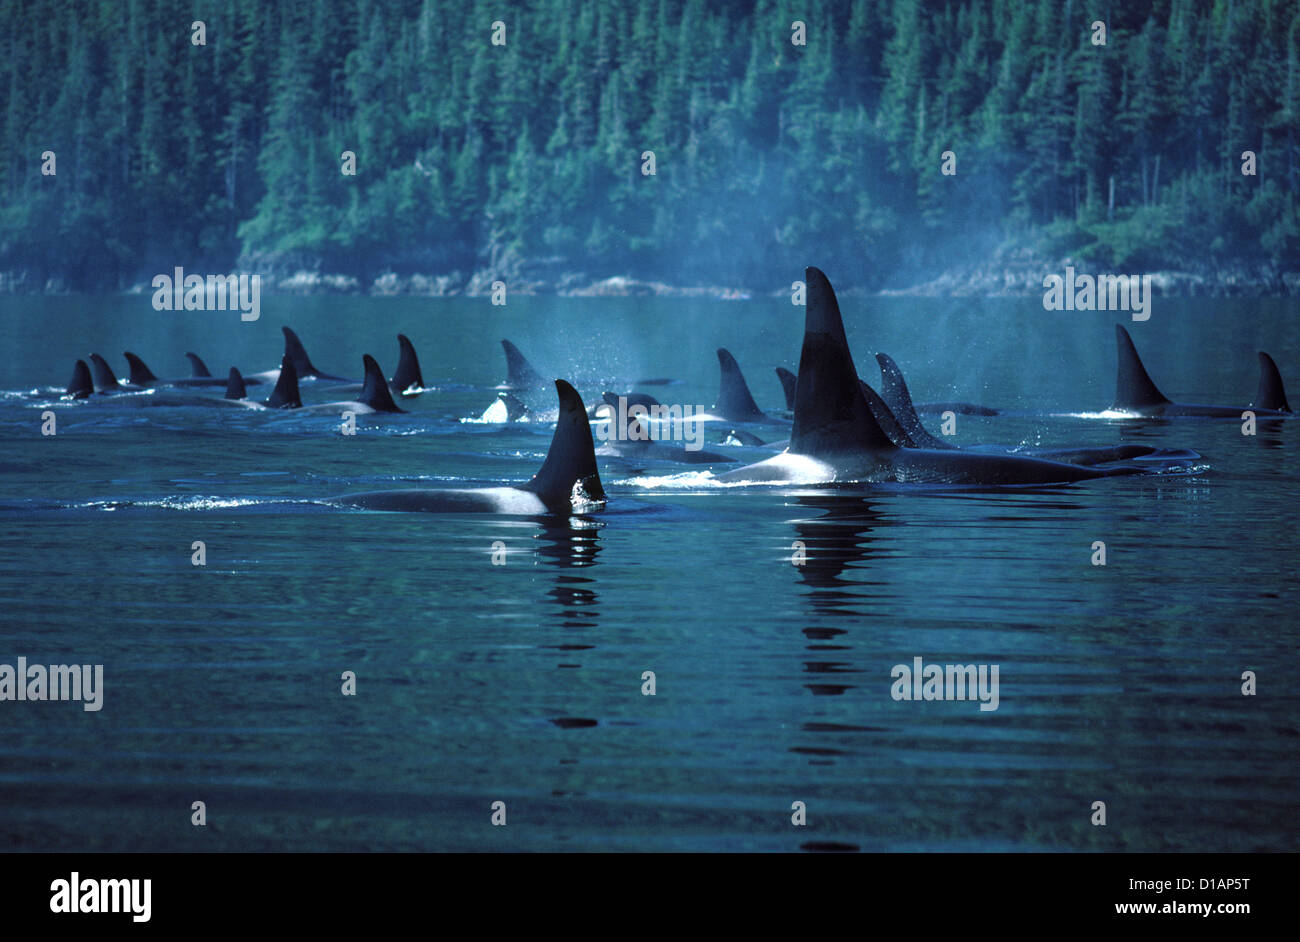 Killer whales; Orca.Orcinus orca. Photographed in Johnstone Strait, British Columbia, Canada Stock Photo